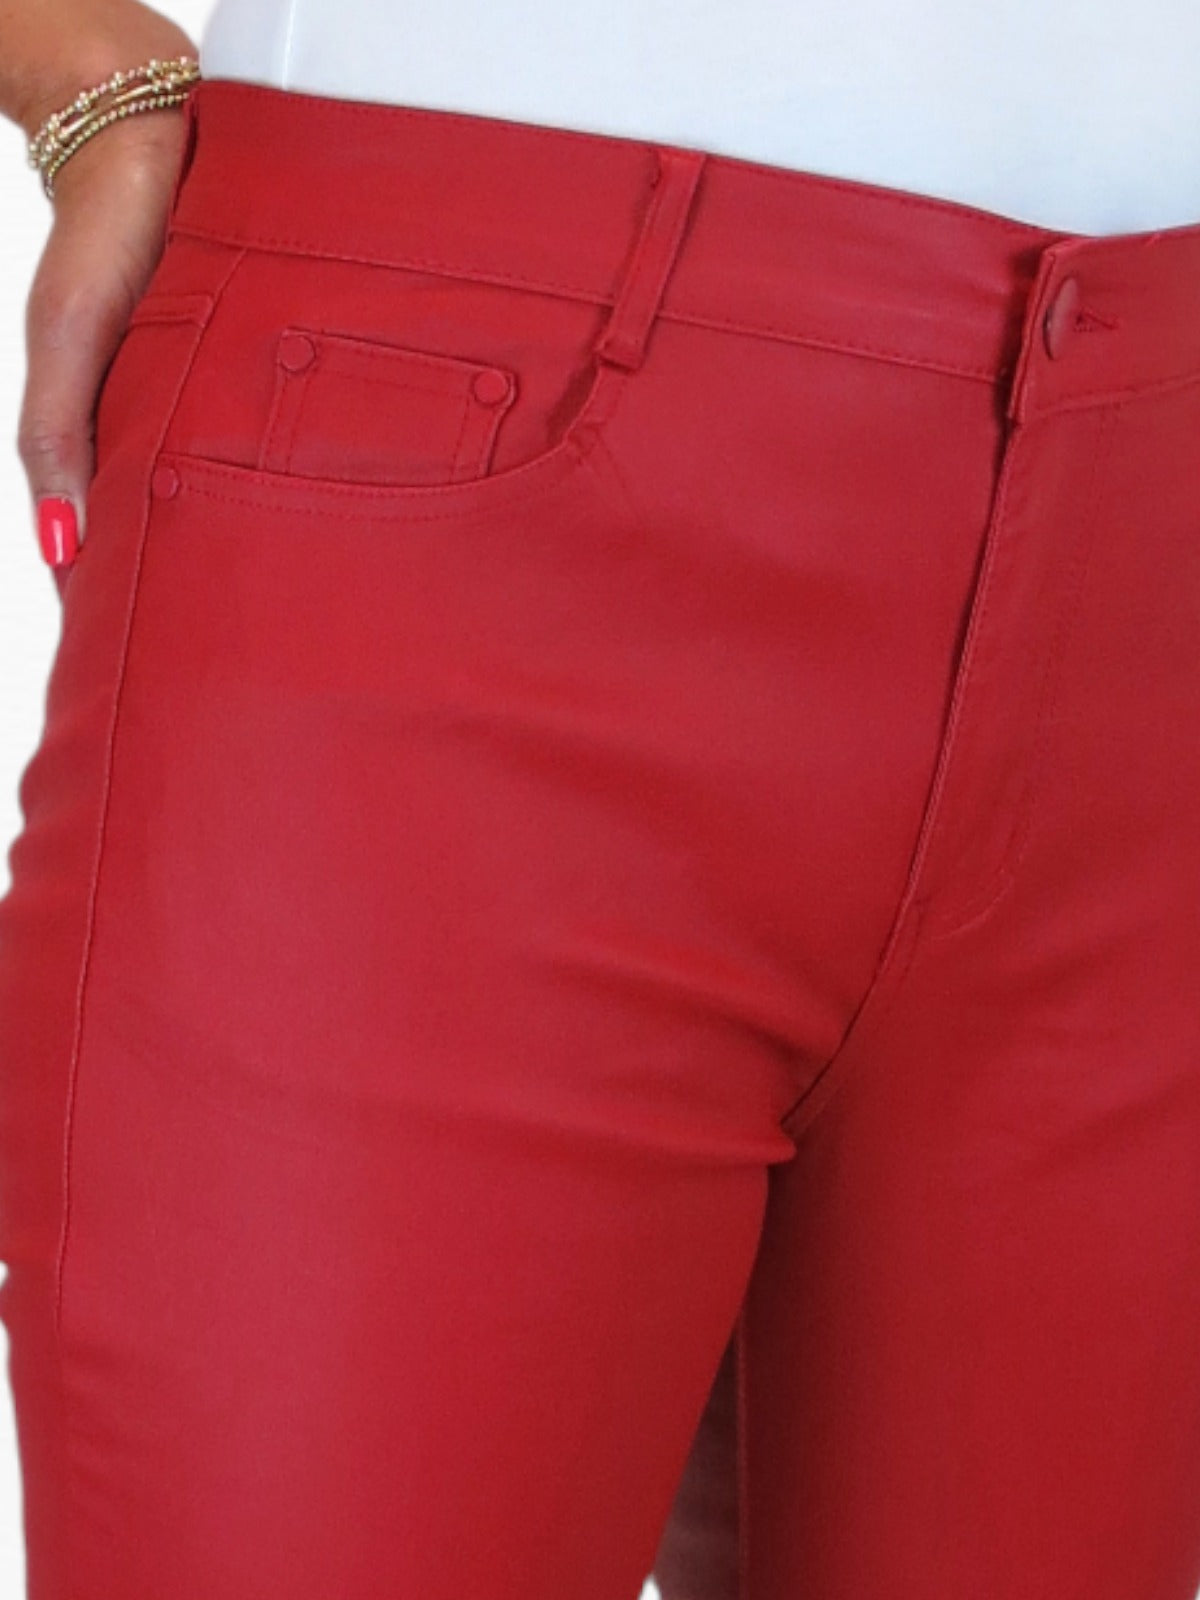 Womens High Waist Stretch Leather Look Jeans Red